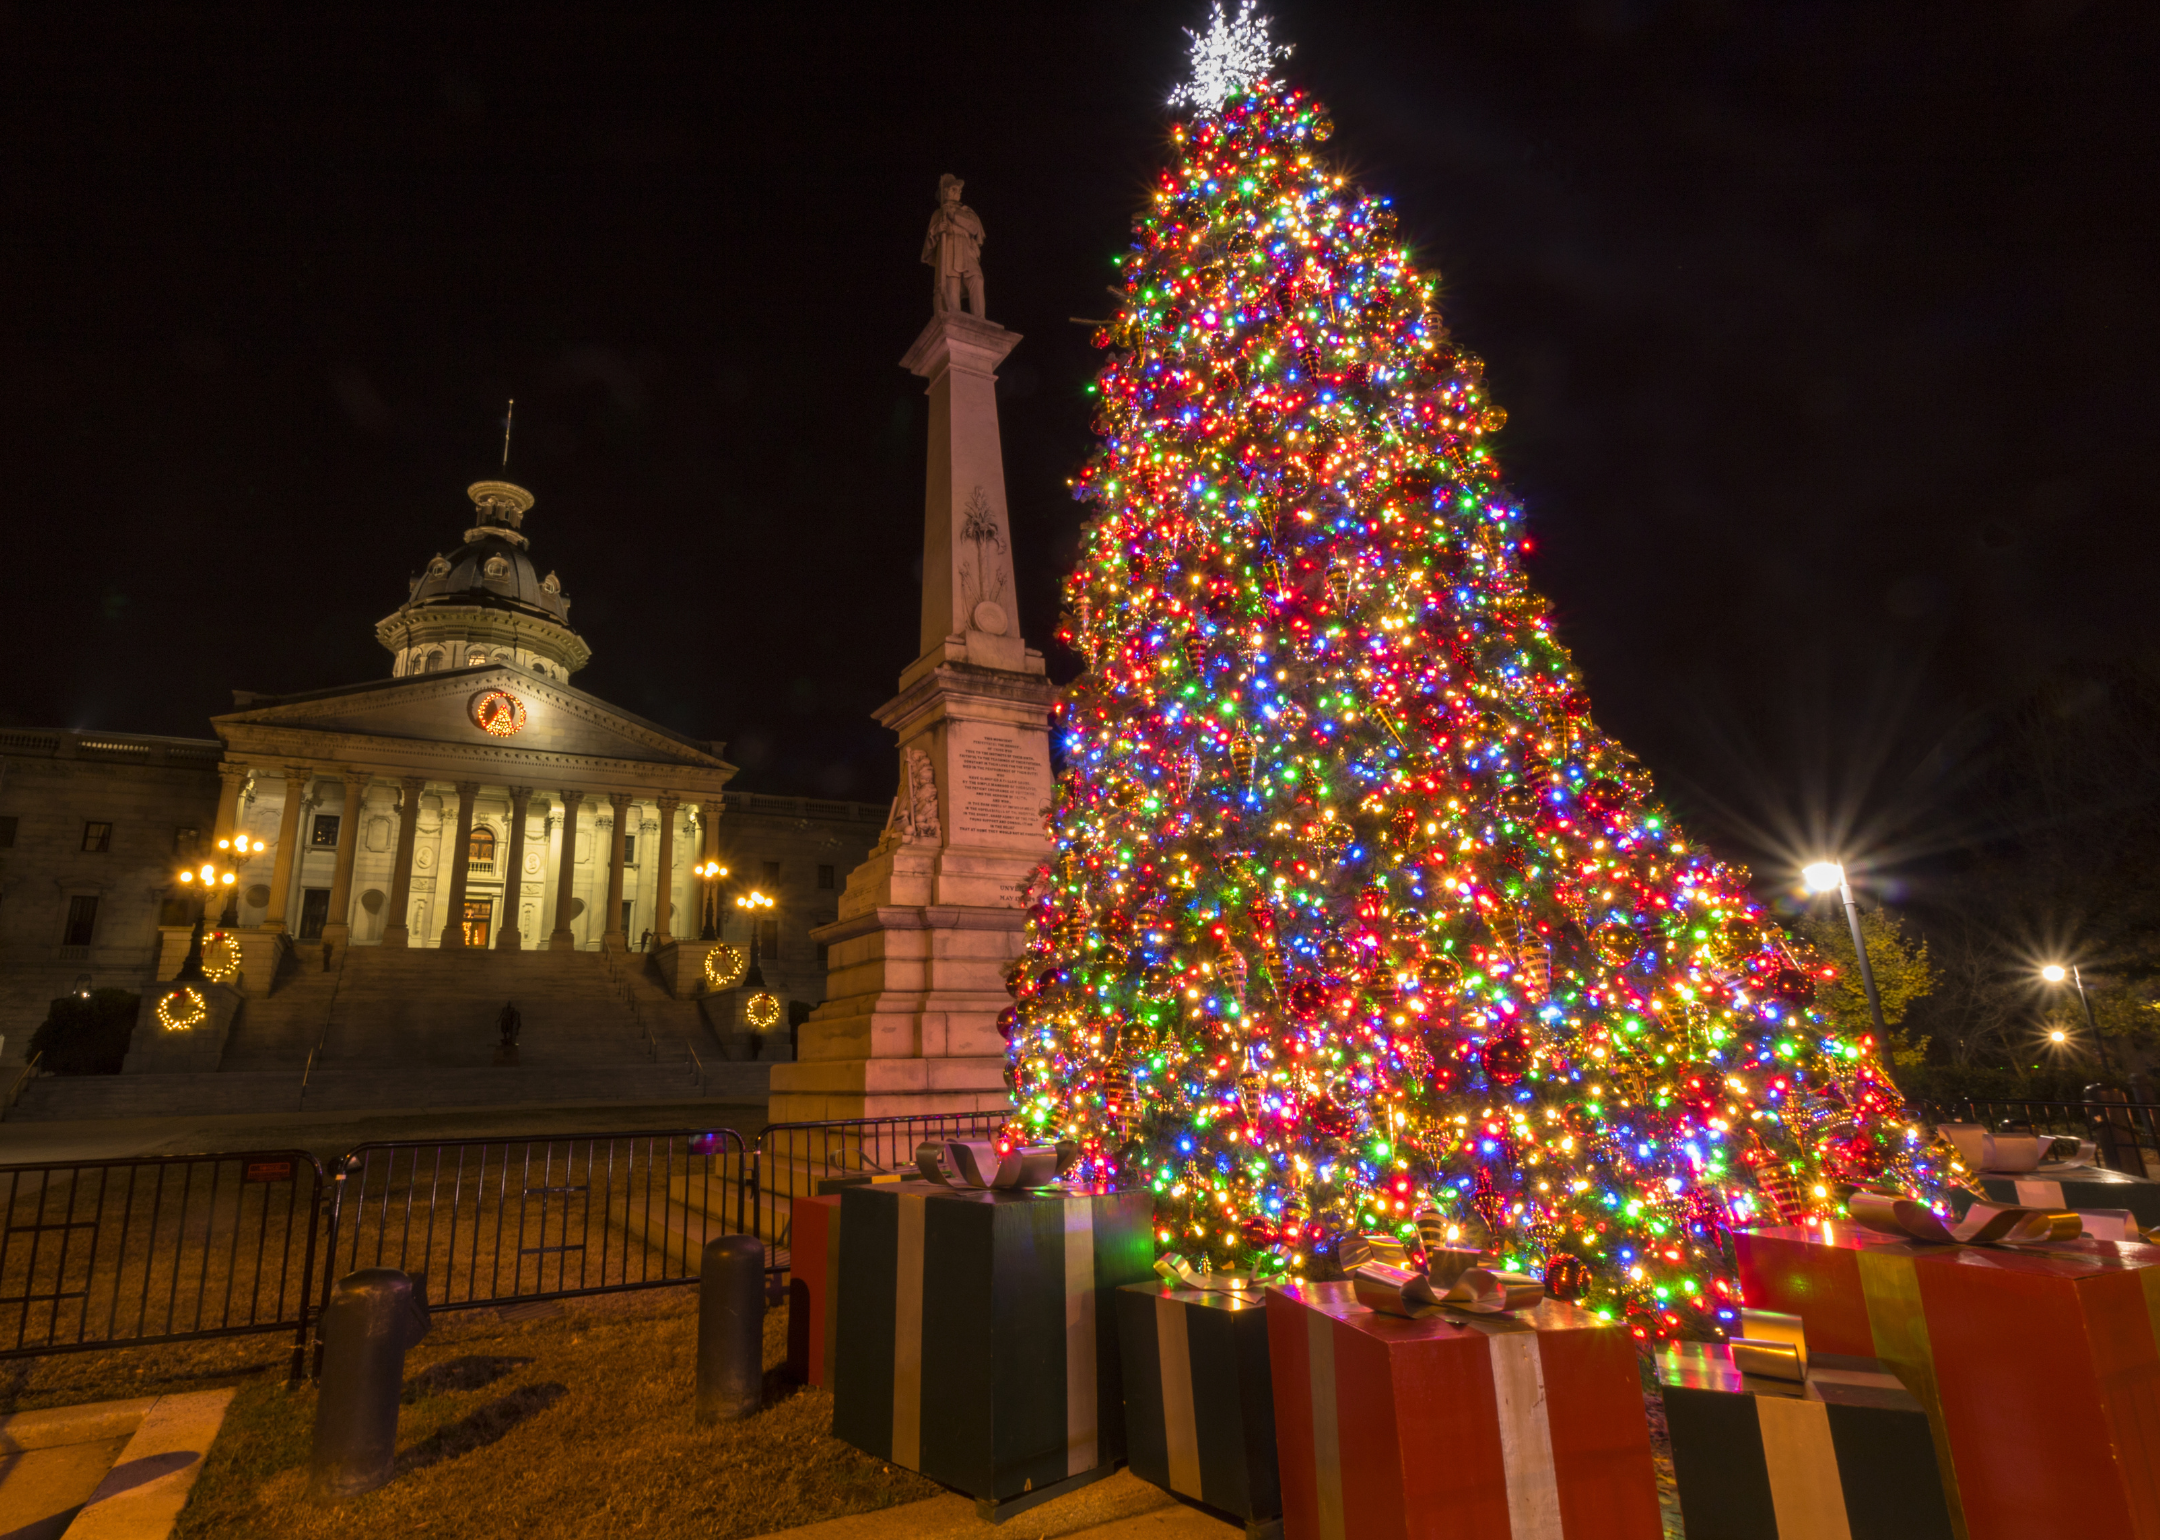 A Christmas tree at night in front of the capitol building.